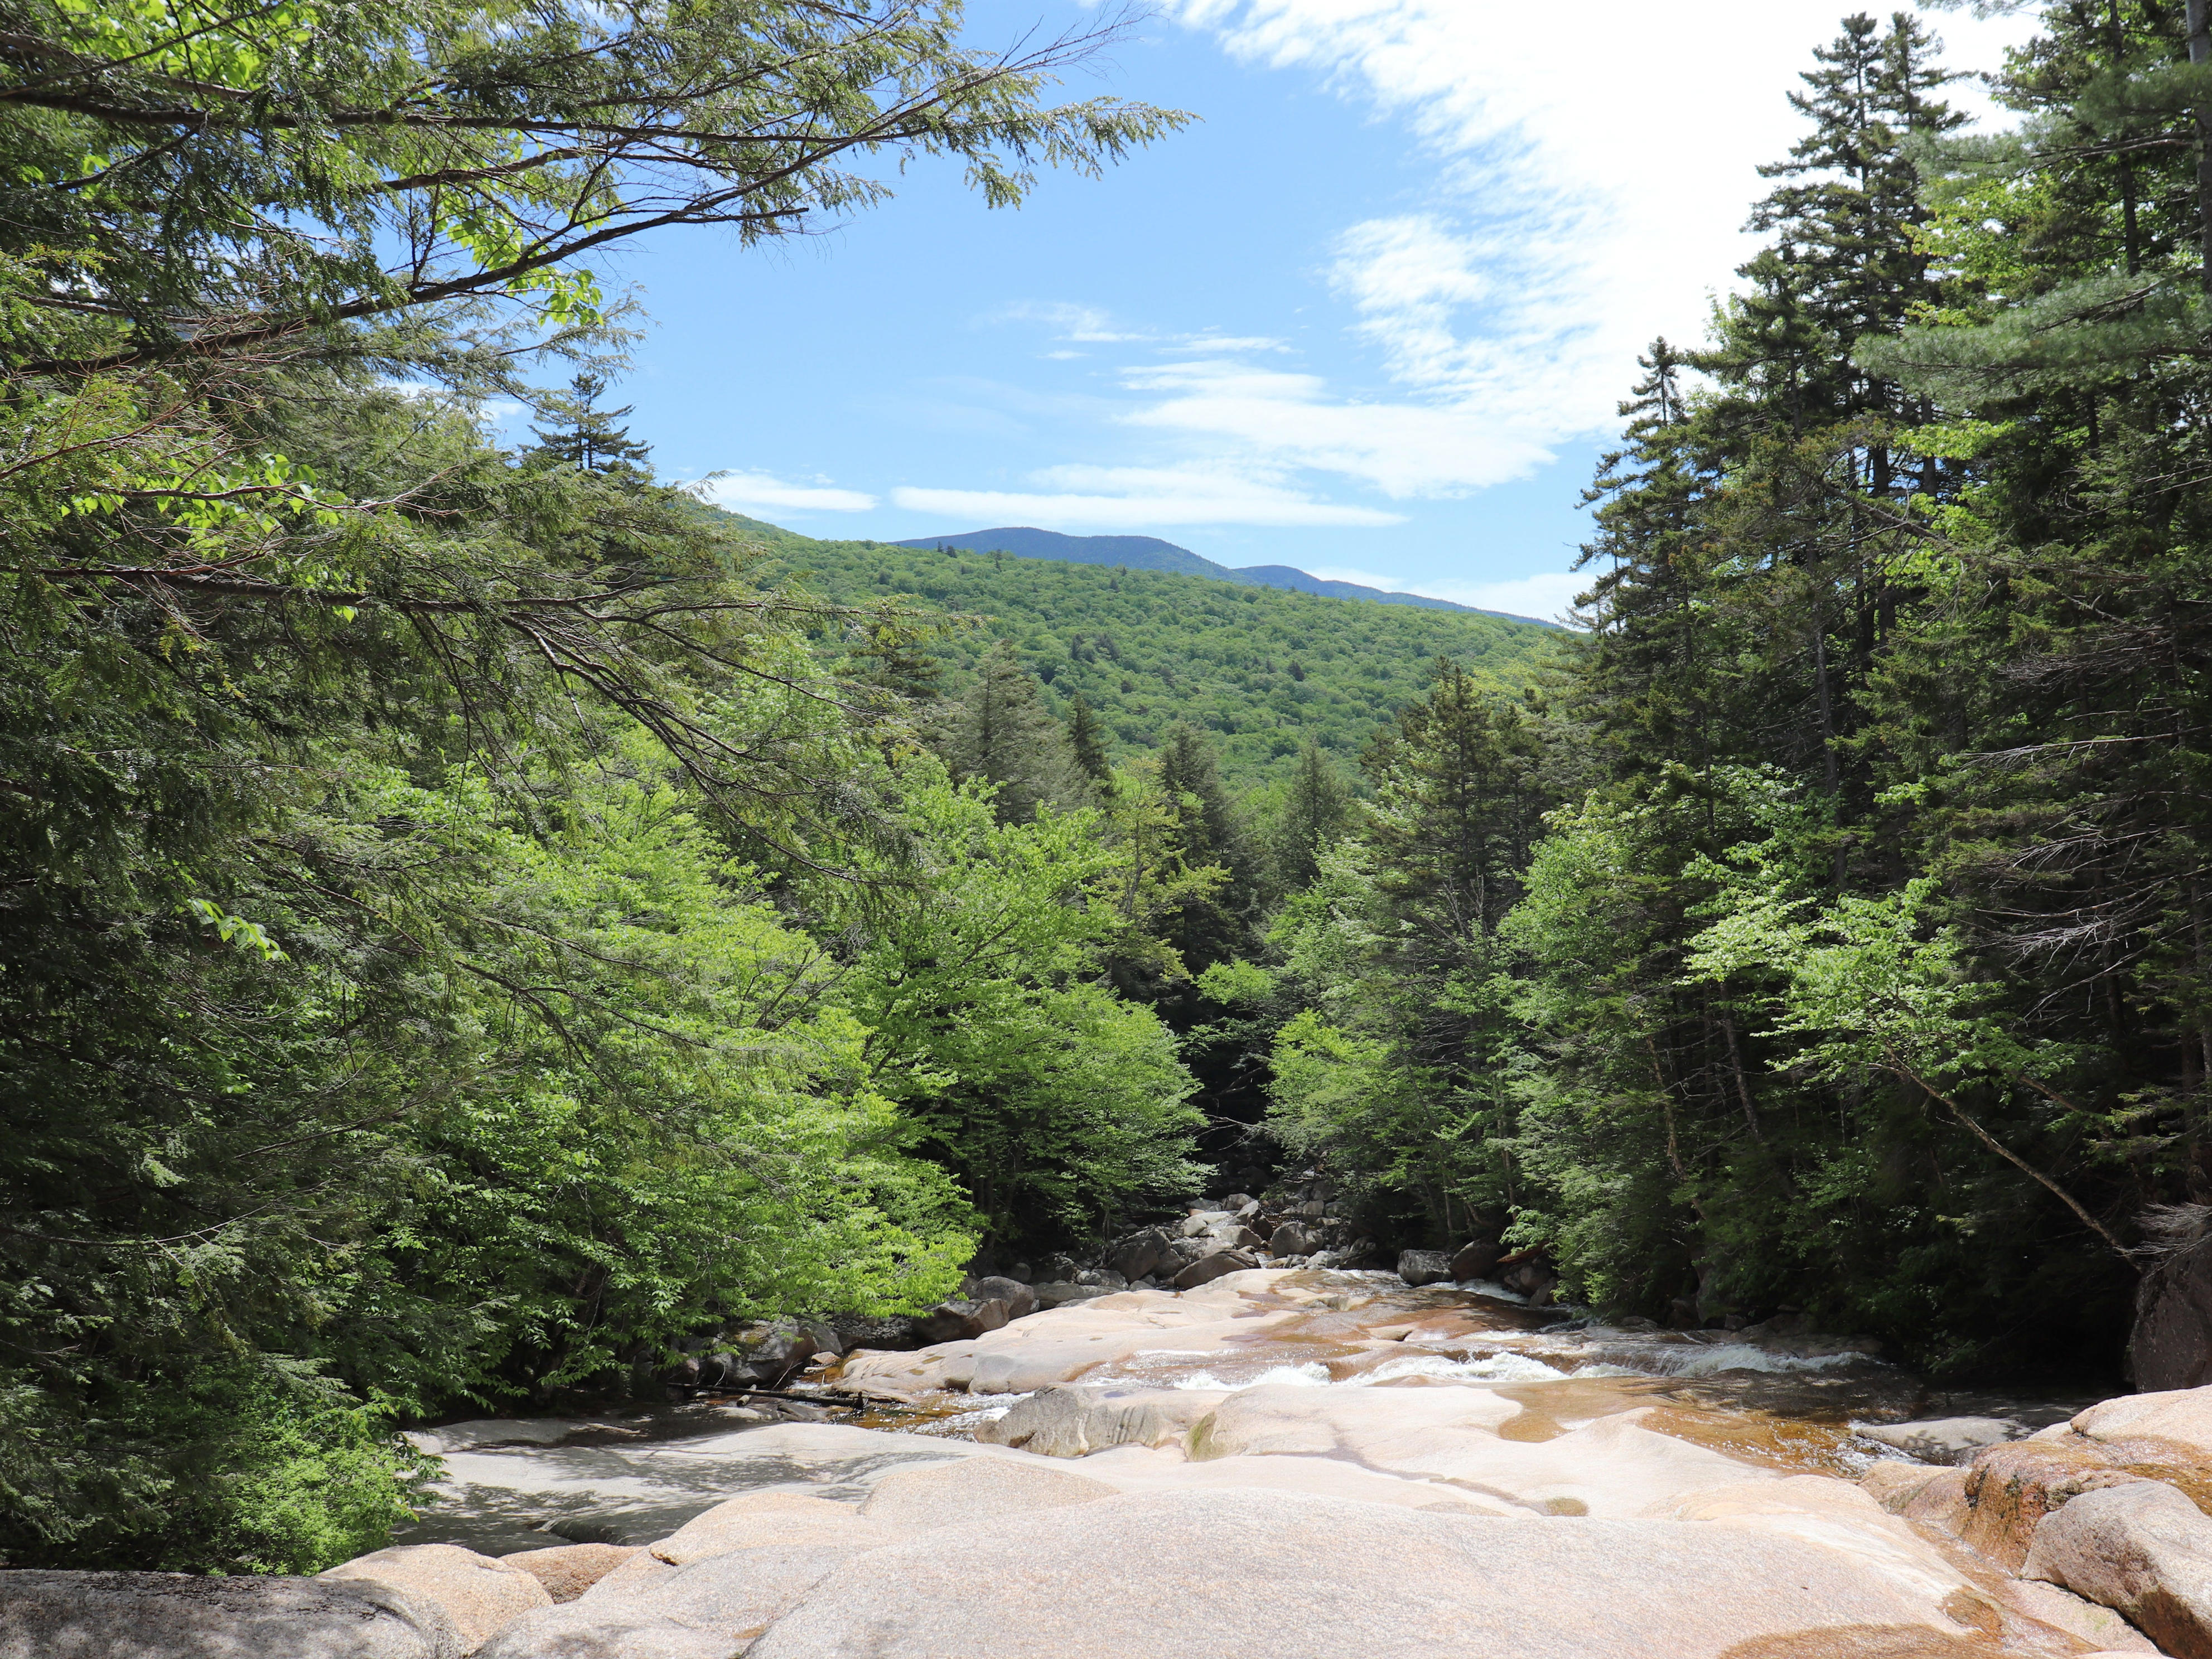 <p>Although this moderate hike can be completed in a day, there are also two campsites along the path for those who want to make a weekend out of it.</p><p>"The good thing about it — or bad, depending on what you are looking for — is that the trail is flat and protected, so the conditions will be the same throughout your hike. Even though it is 9.8 miles long, the fact that it is pretty flat makes it easy for a family to do if they are willing to spend the whole day," Trevor Peschek, a hiking enthusiast who works for <a href="https://www.wanderu.com/">Wanderu</a>, told Insider.</p><p>He also said that you'll encounter two beautiful waterfalls, Franconia Falls and Thirteen Falls, along the path.</p>